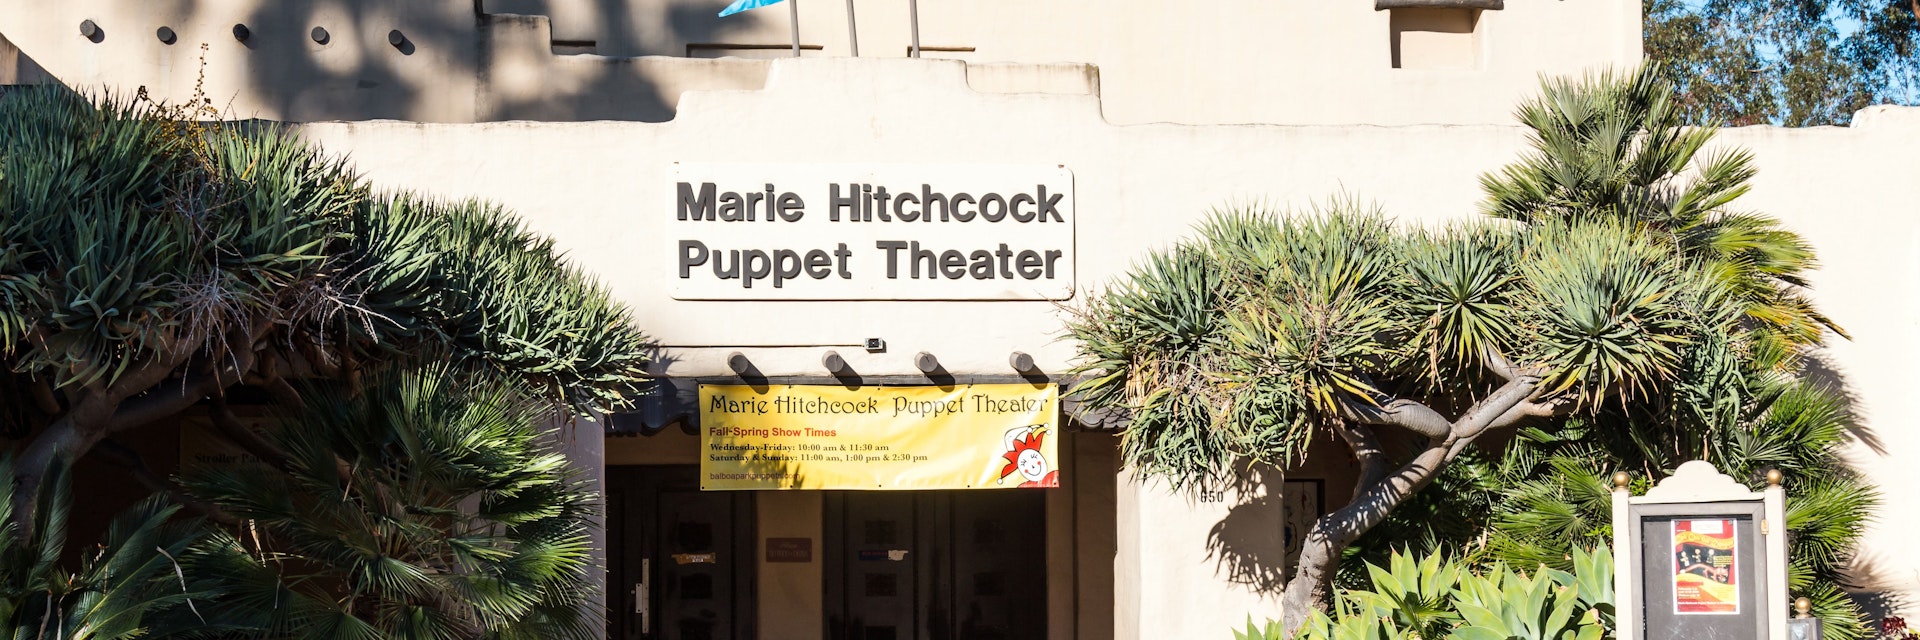 SAN DIEGO, CALIFORNIA - FEBRUARY 17, 2018:  The Marie Hitchcock Puppet Theater in Balboa Park, North America's longest continually-running puppet theater, with shows beginning in 1945 after WWII.; Shutterstock ID 1027095214; your: Bridget Brown; gl: 65050; netsuite: Online Editorial; full: POI Image Update